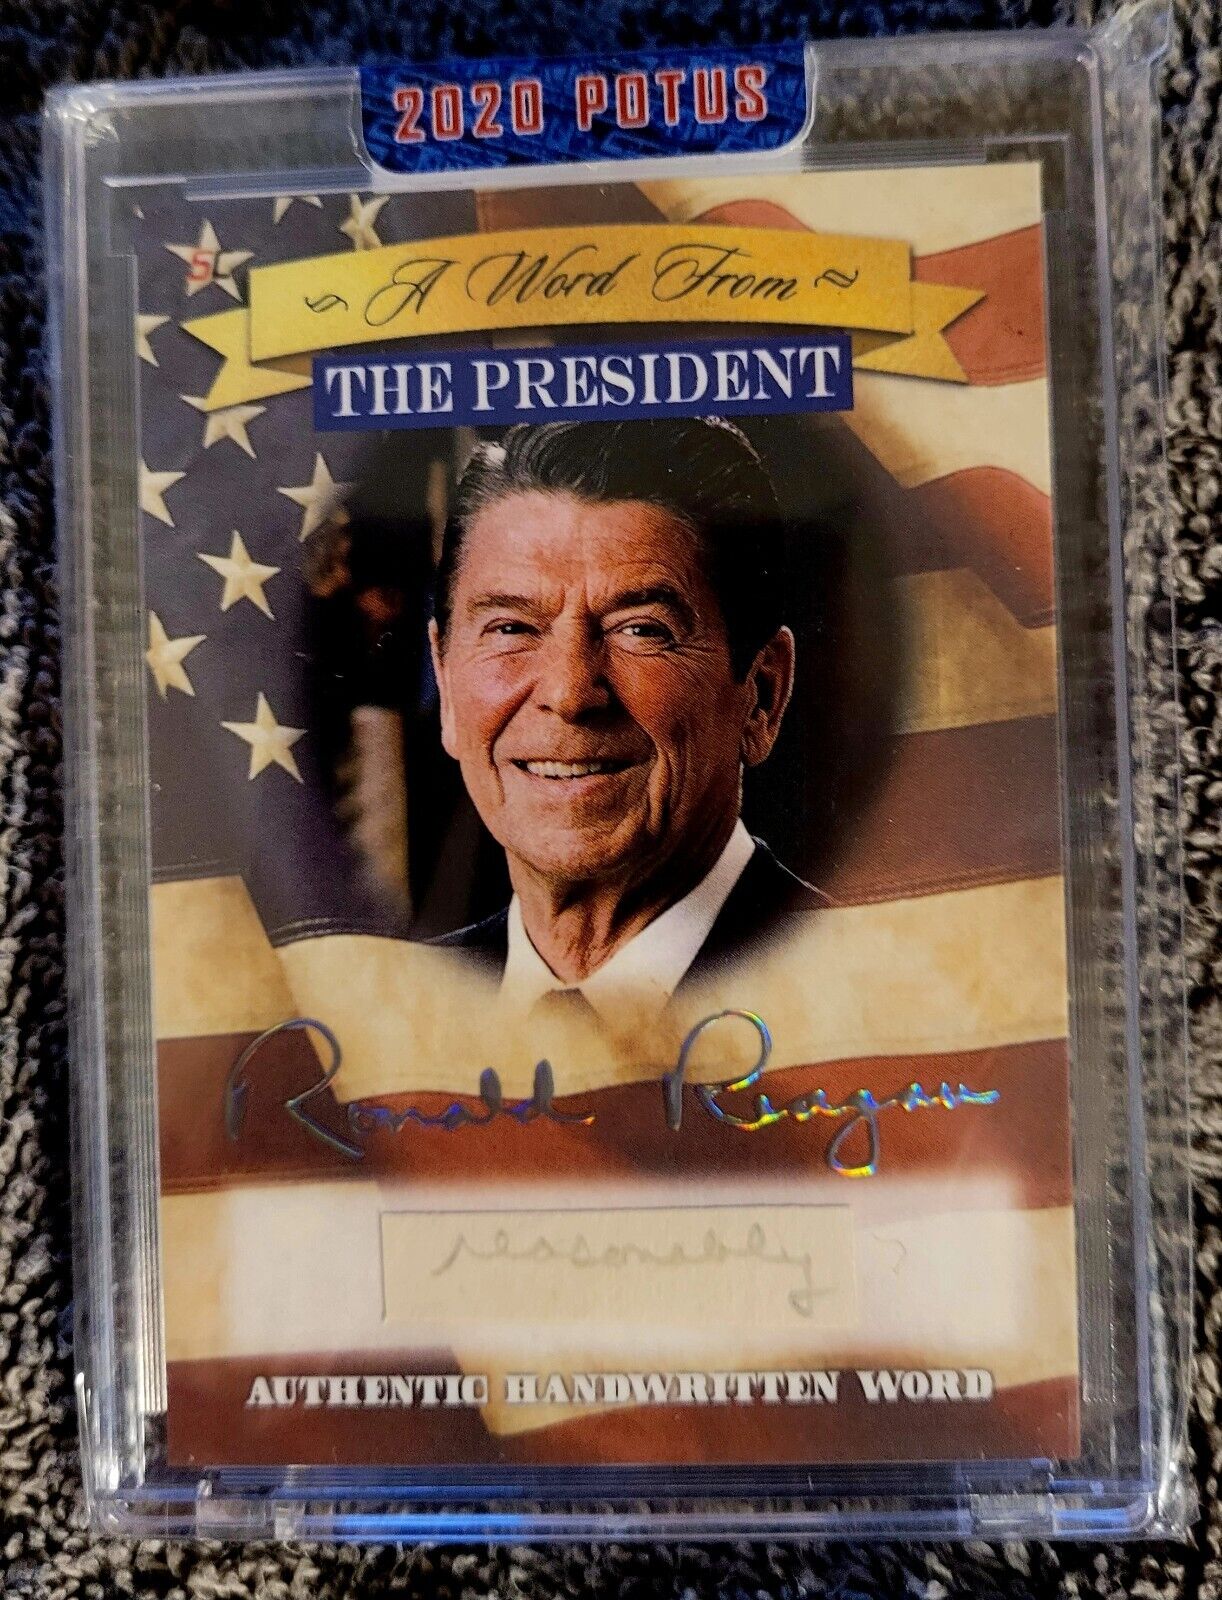 2020 POTUS WORD FROM THE PRESIDENT * RONALD REAGAN * AUTHENTIC HANDWRITTEN WORD